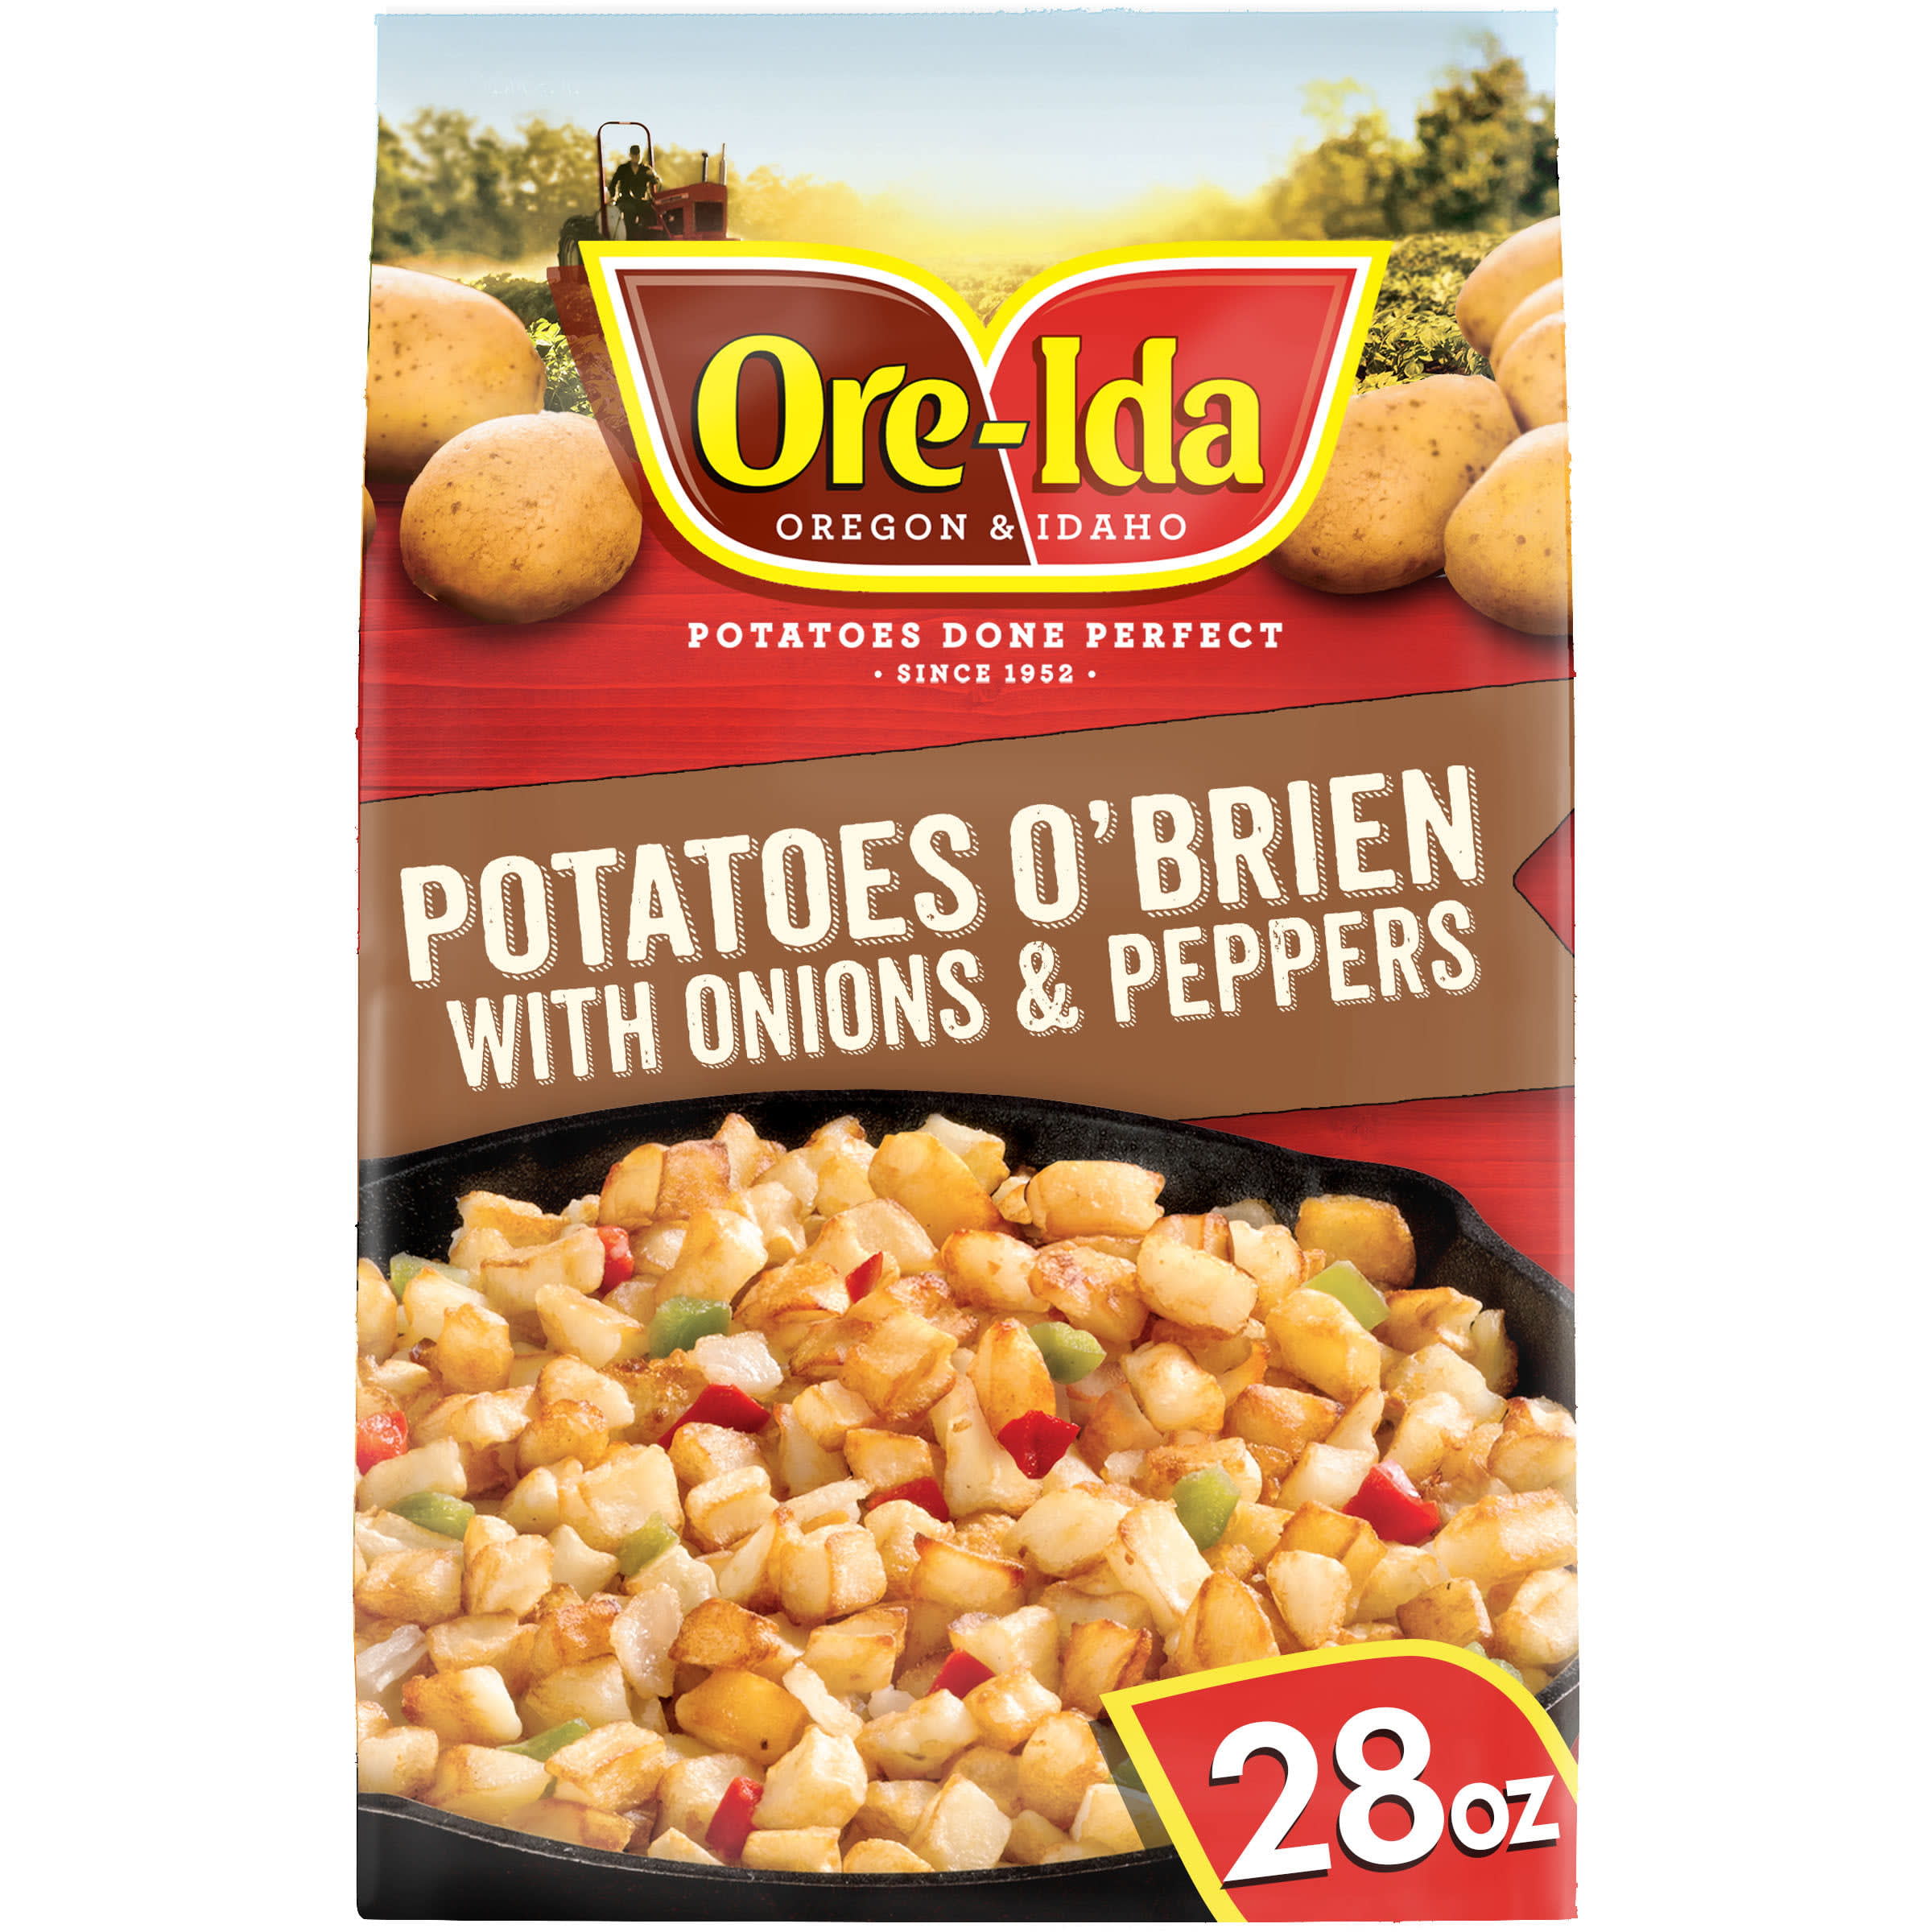 Ore-Ida Potatoes O'Brien with Onions & Peppers Frozen Potatoes, 28 oz Bag -  DroneUp Delivery